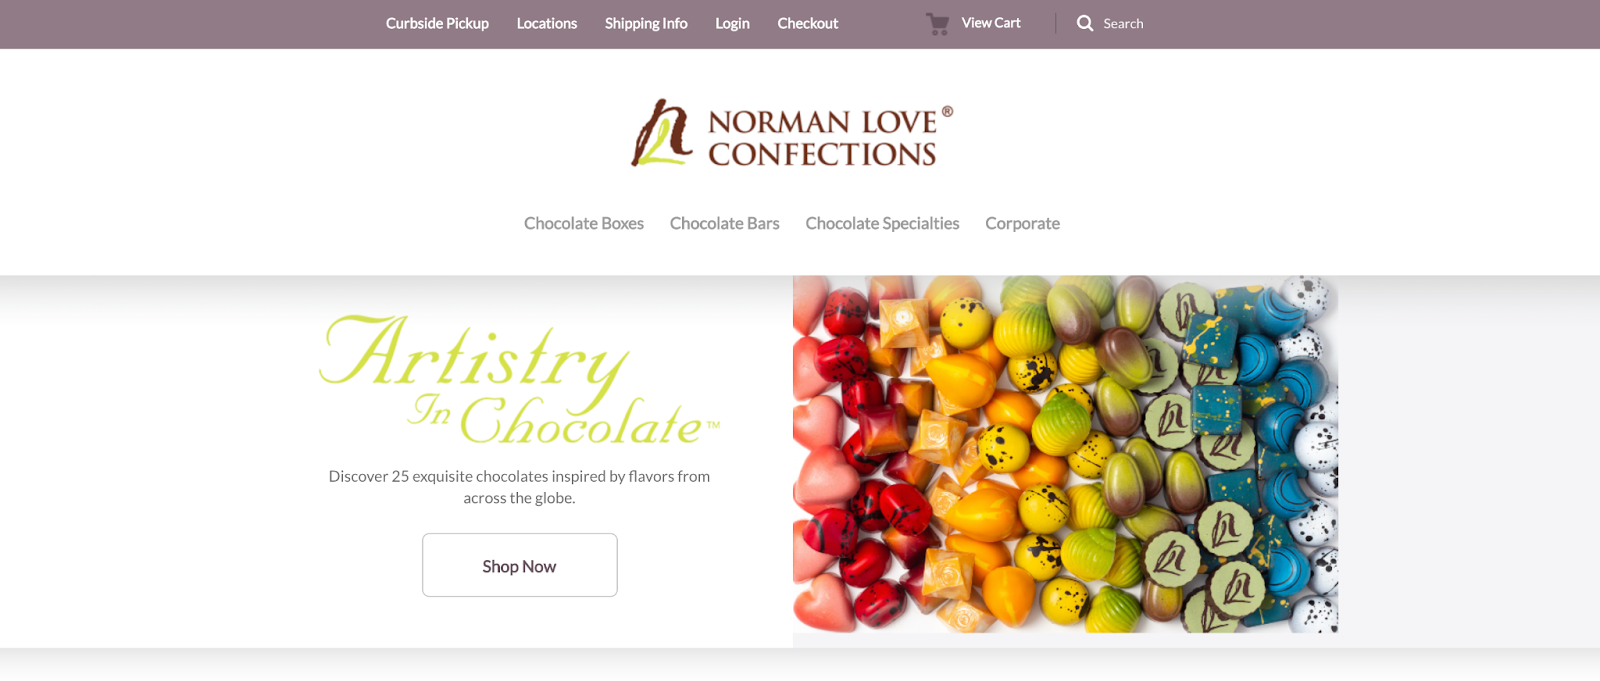 Norman Loves Confections selected an eye-catching visual for their homepage.